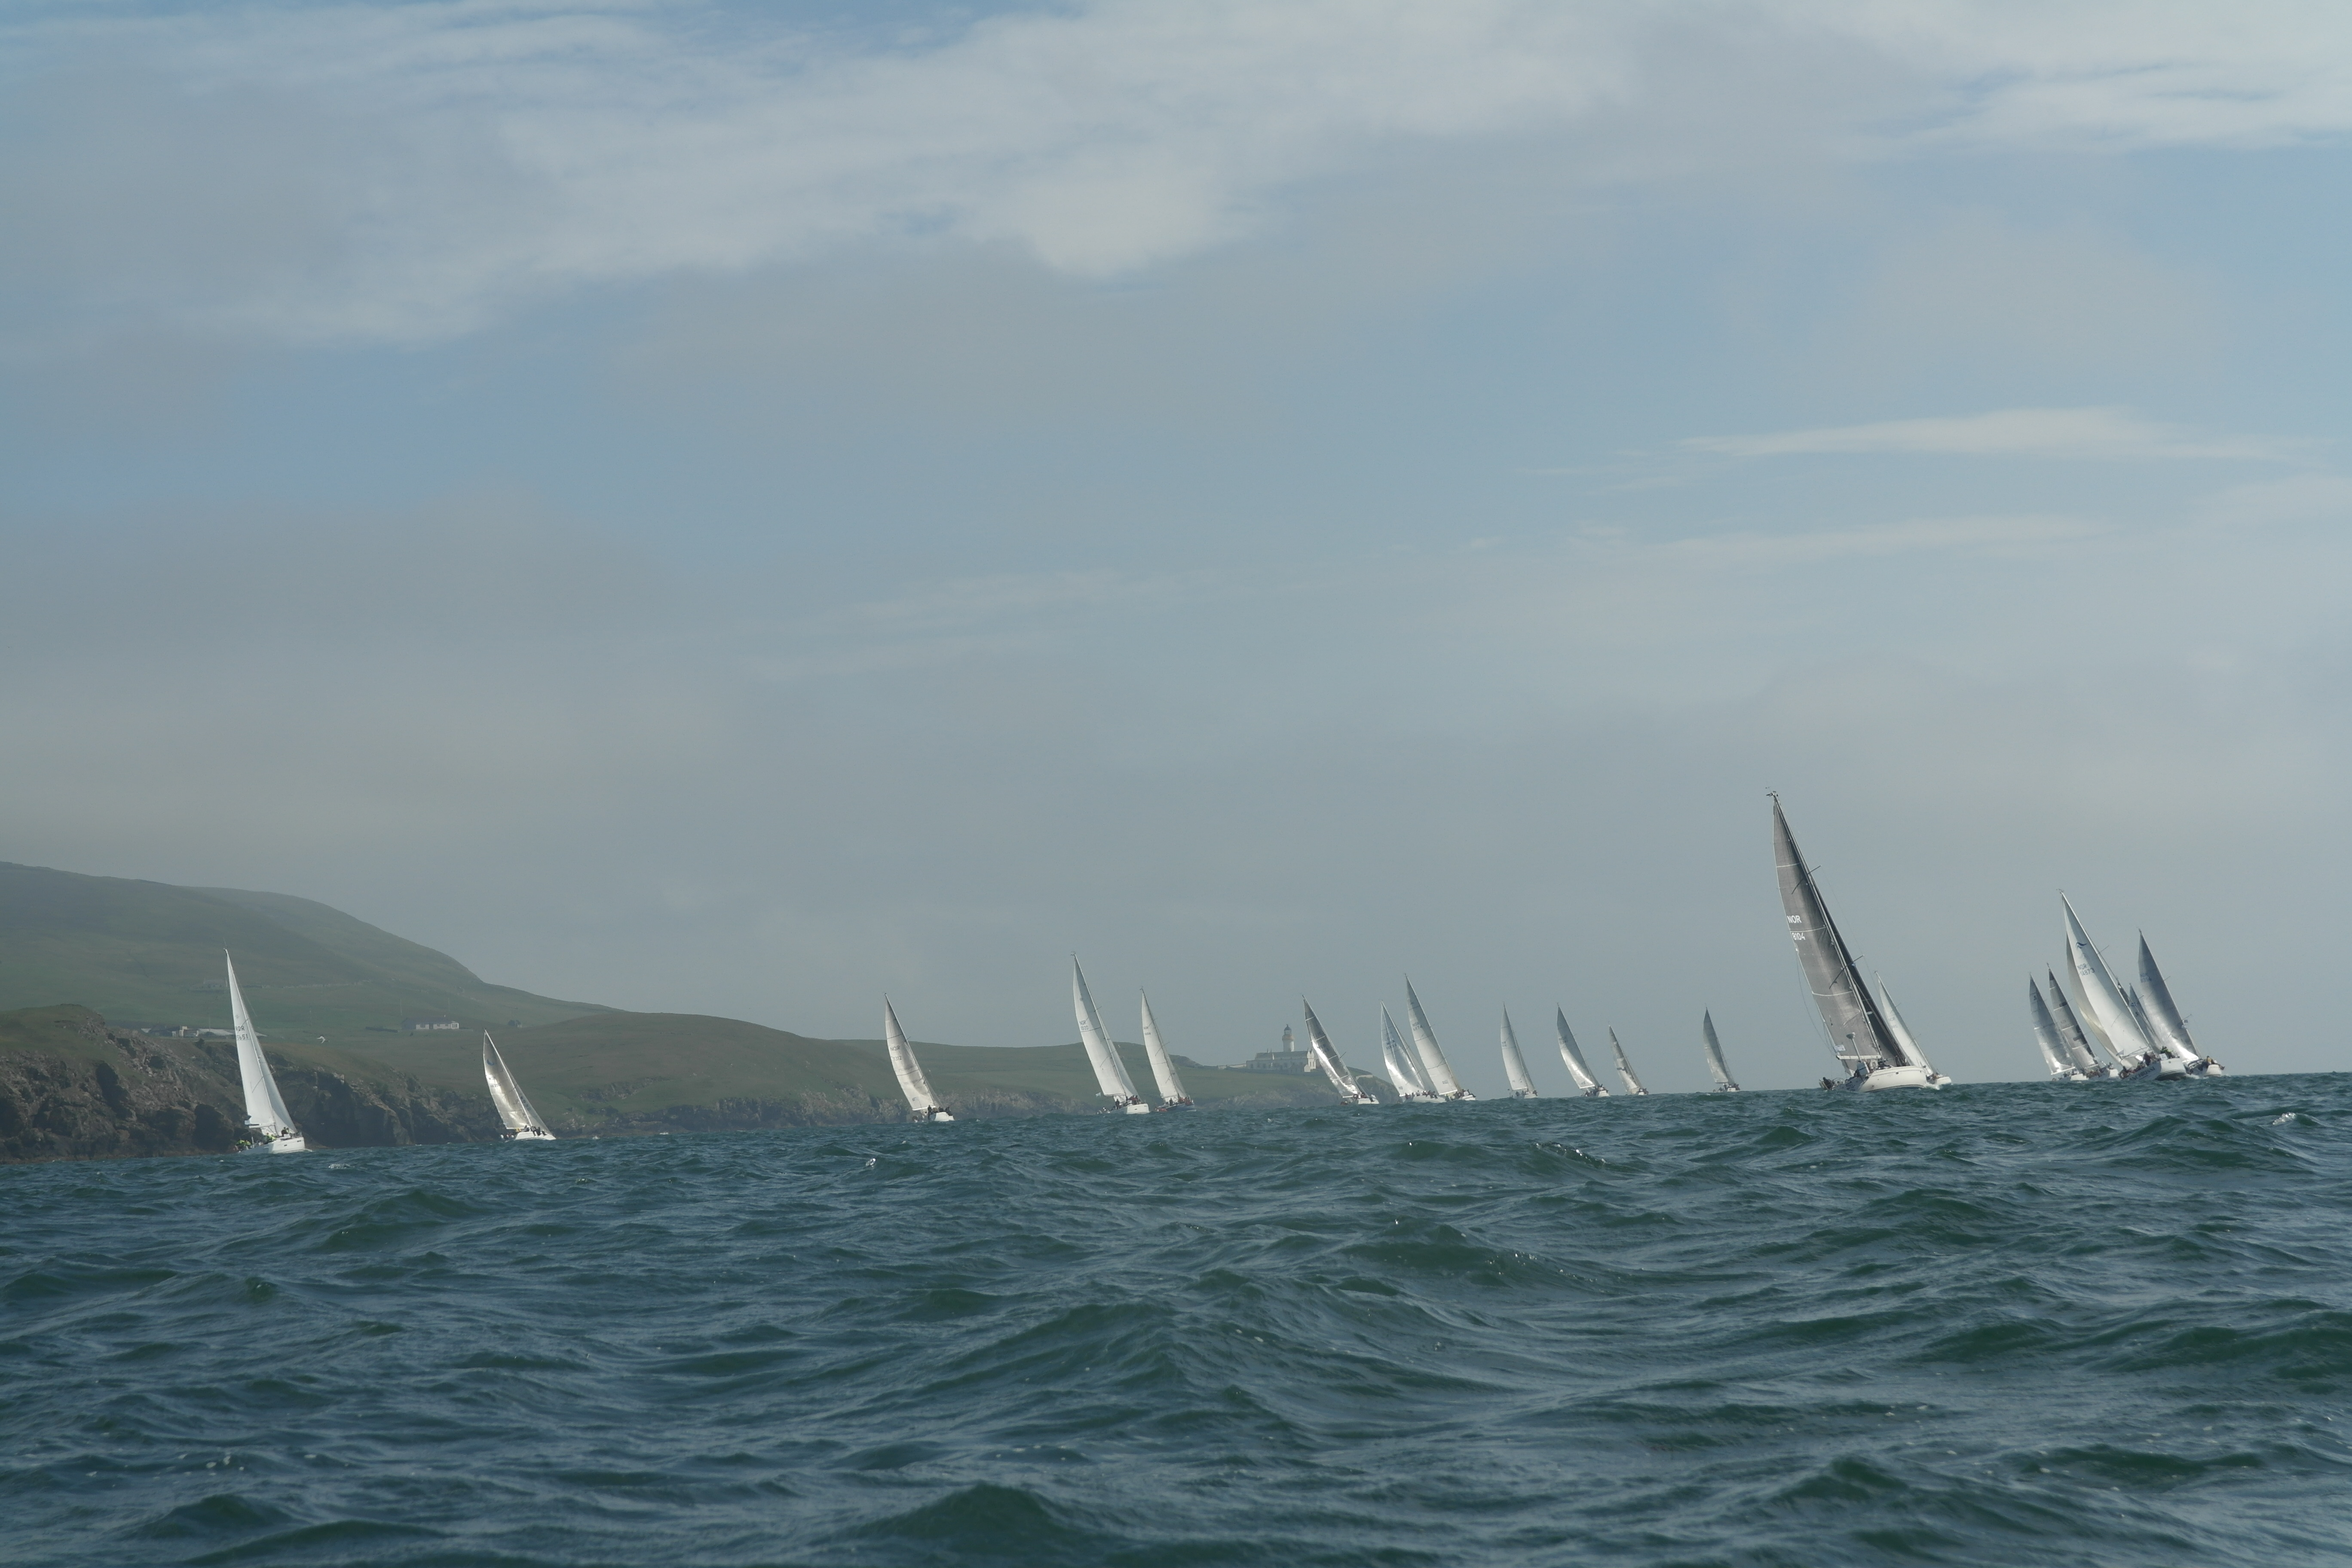 The start from Lerwick